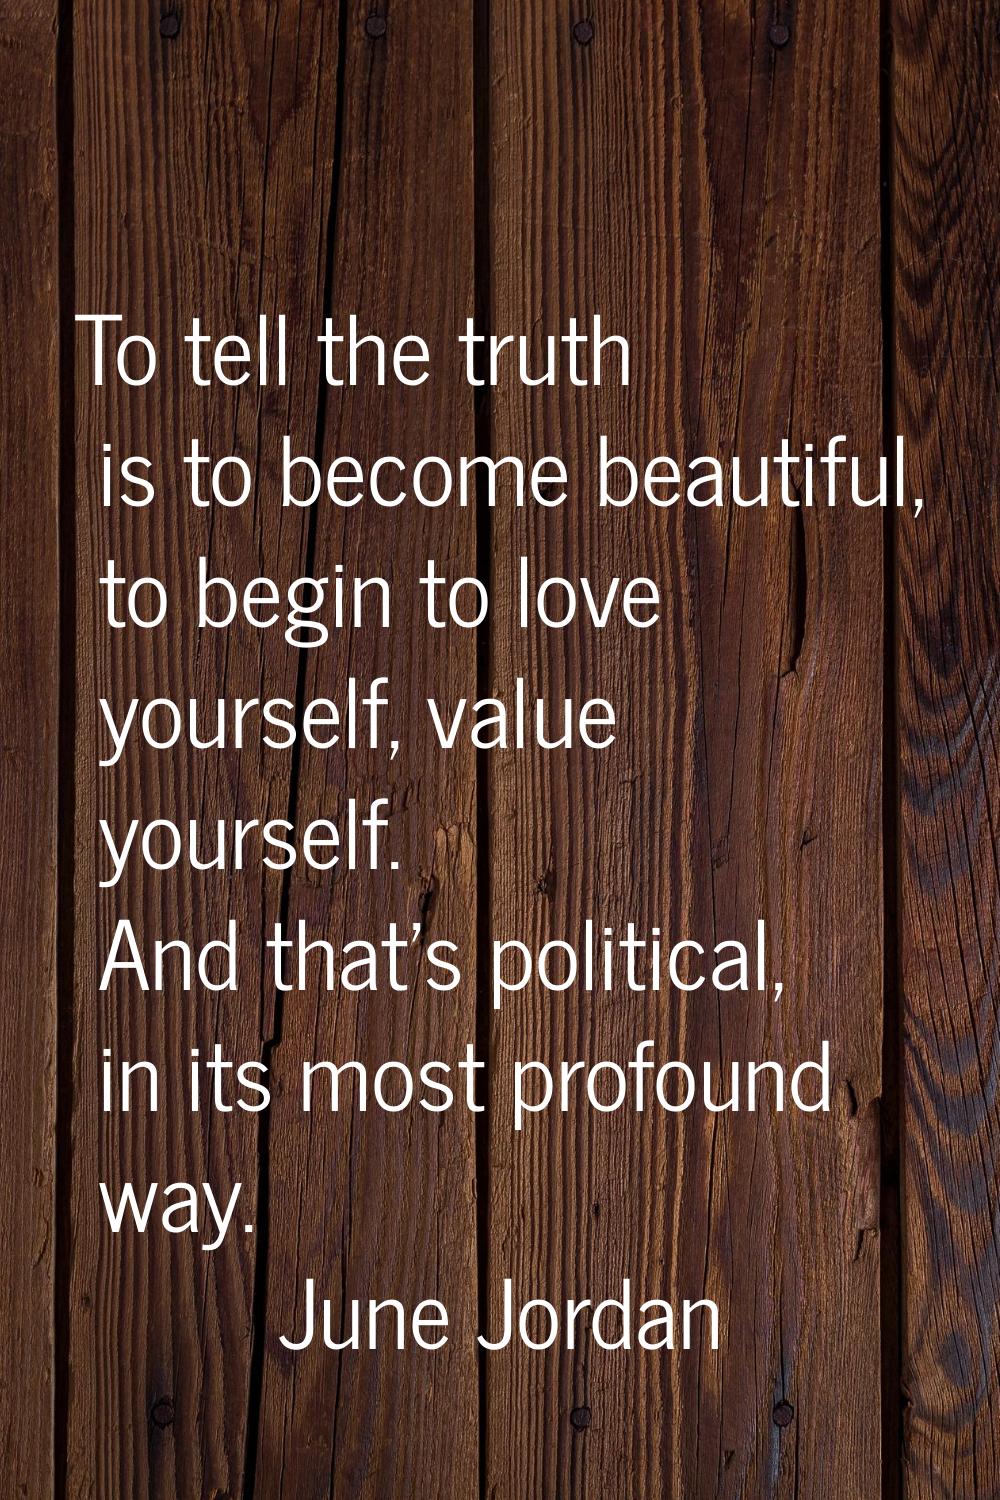 To tell the truth is to become beautiful, to begin to love yourself, value yourself. And that's pol